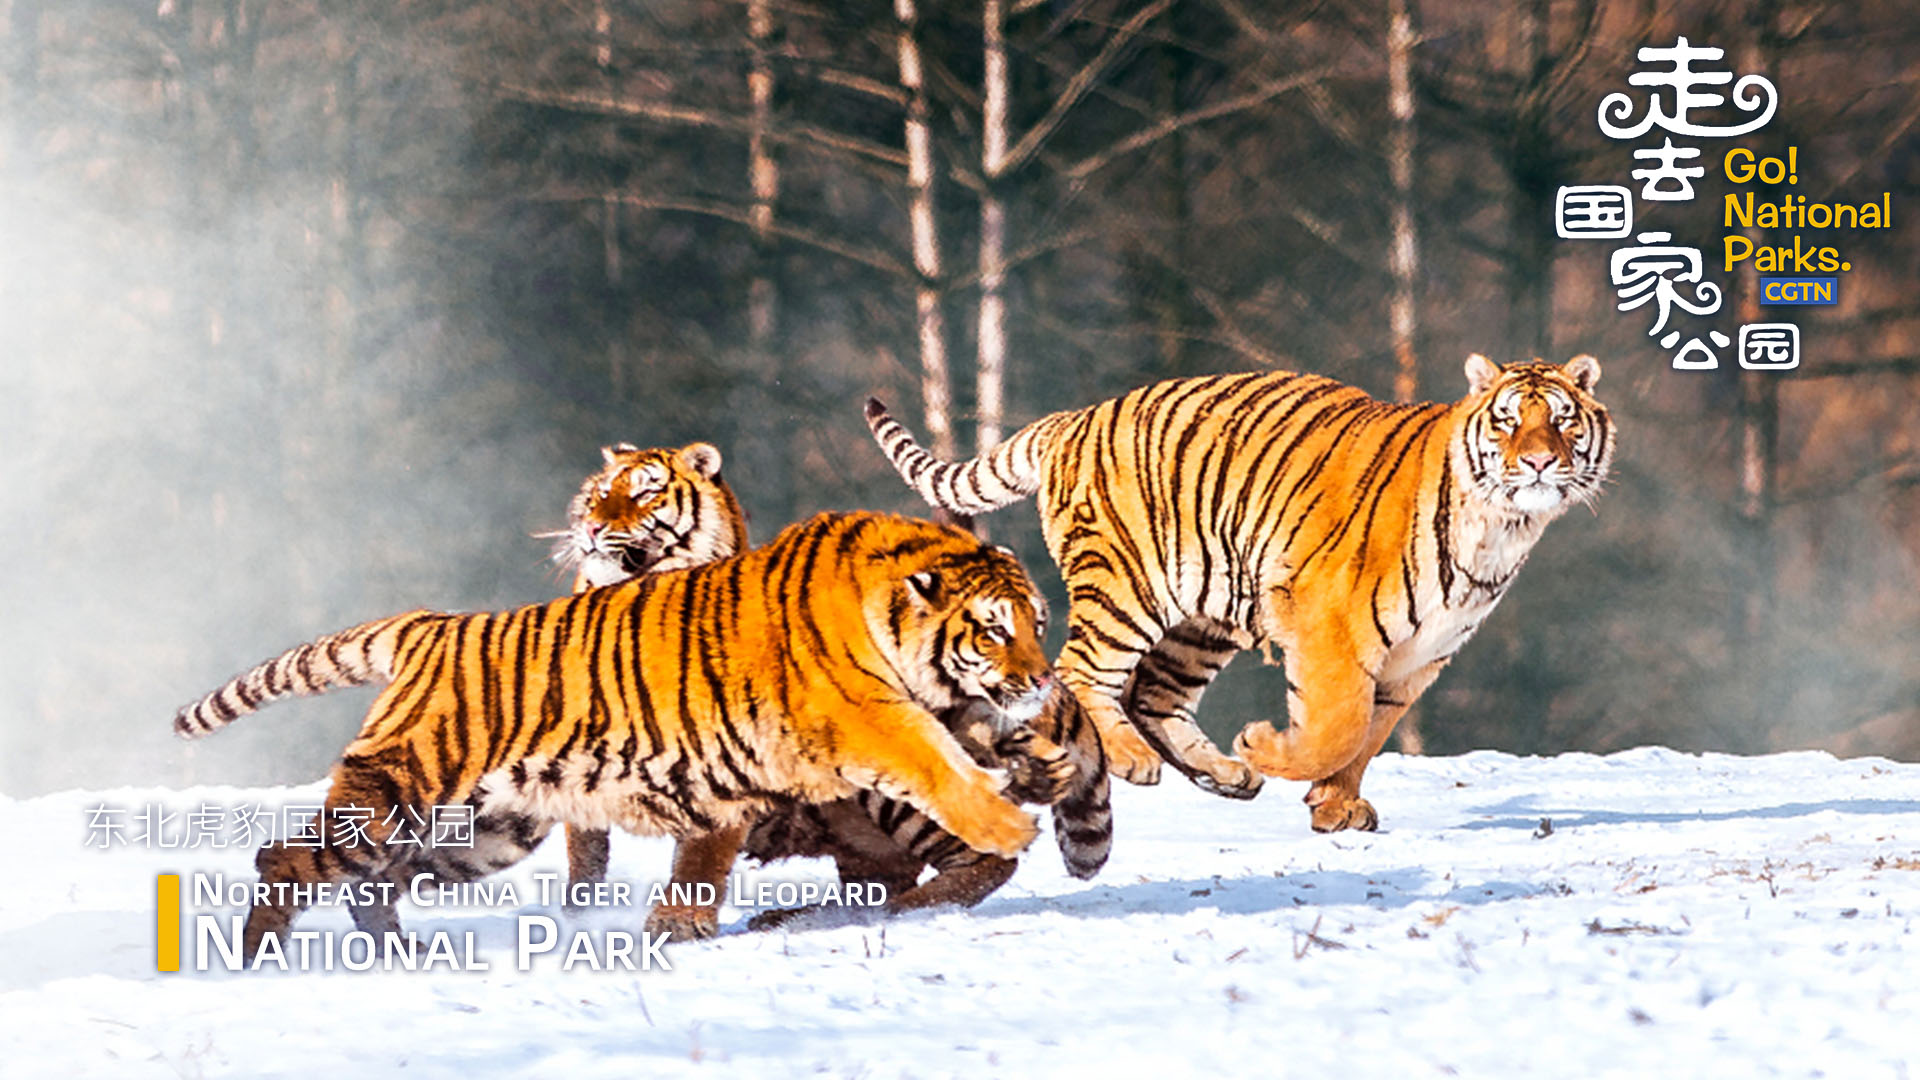 Go! Northeast China Tiger and Leopard National Park